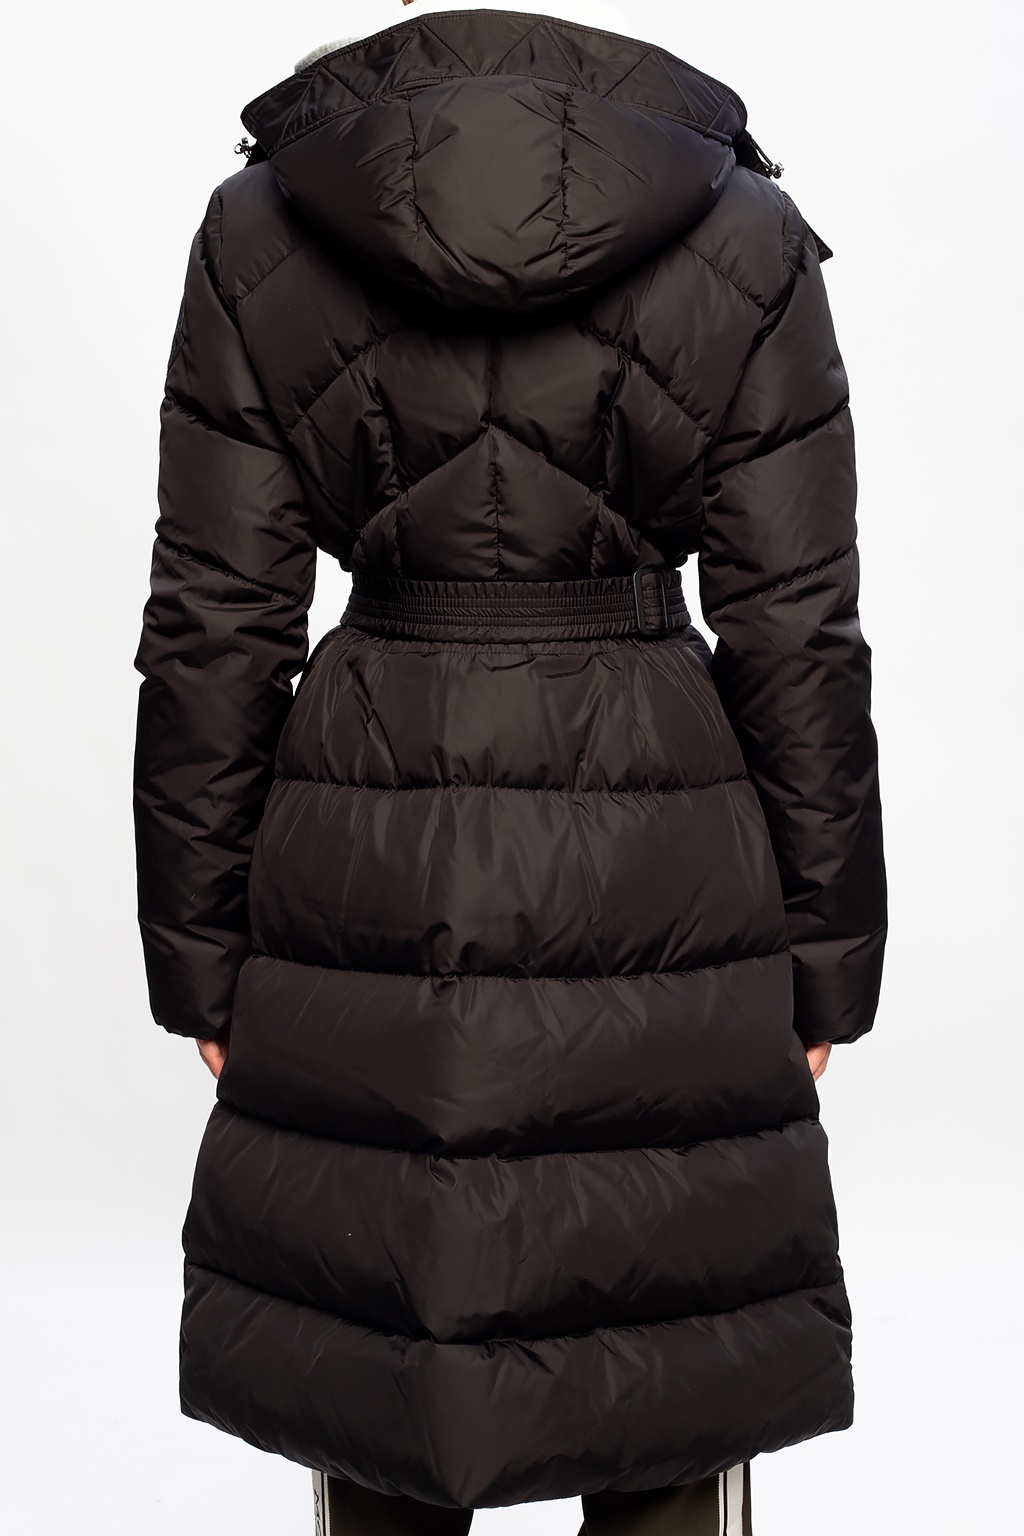 Agot' quilted down coat with hood Moncler - Vitkac Singapore